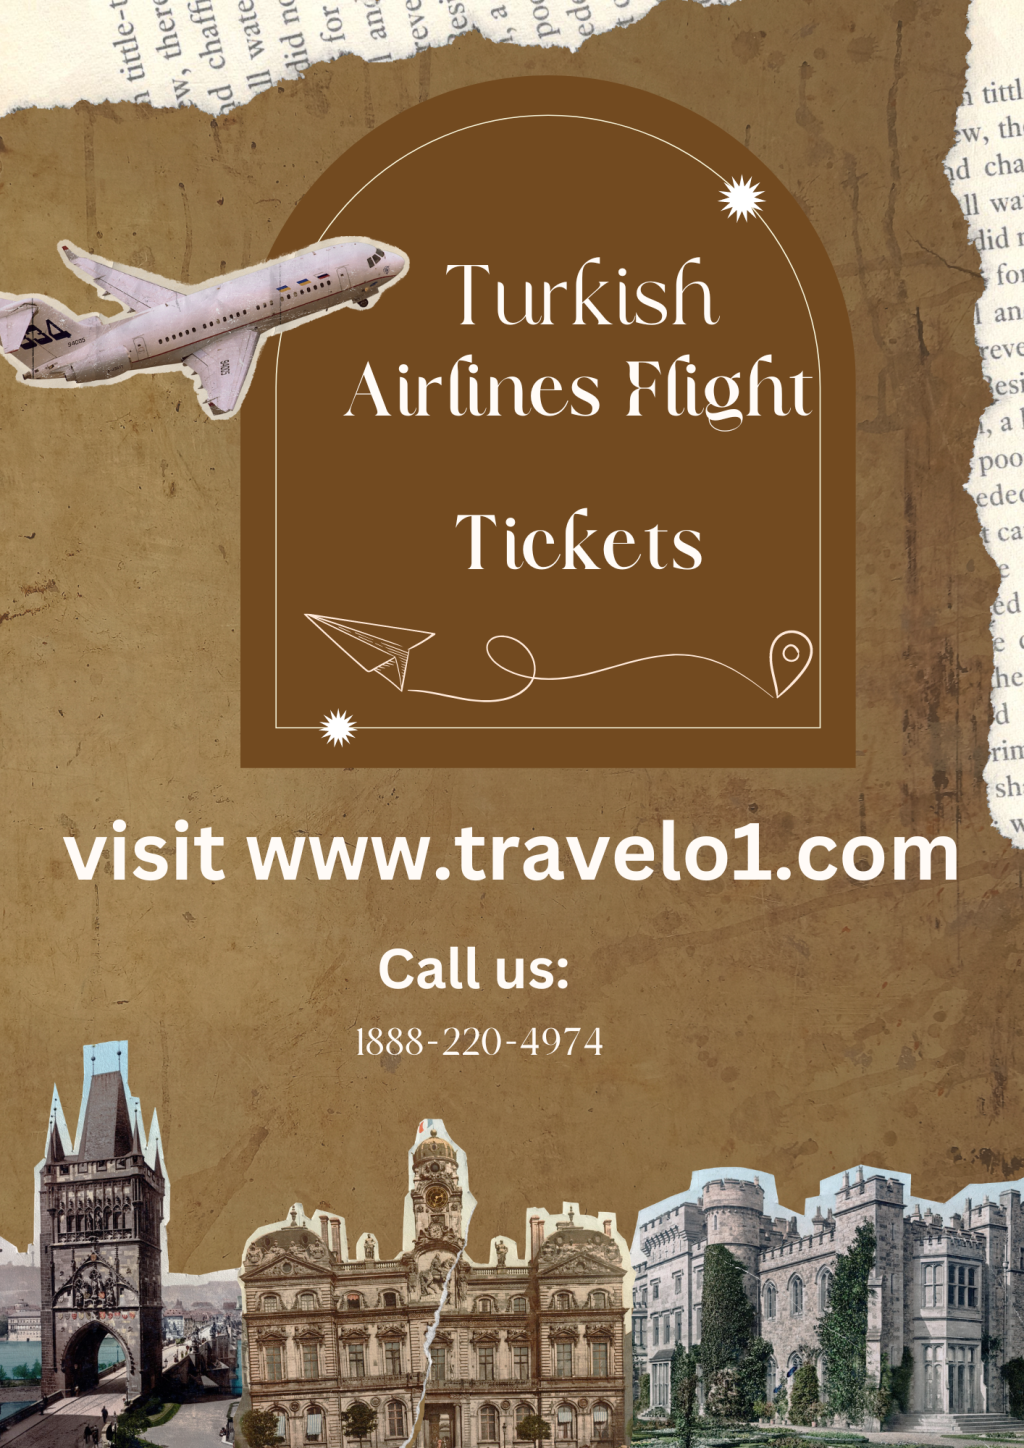 How Can I Get a Better Rate on Turkish Airlines Flight Tickets?